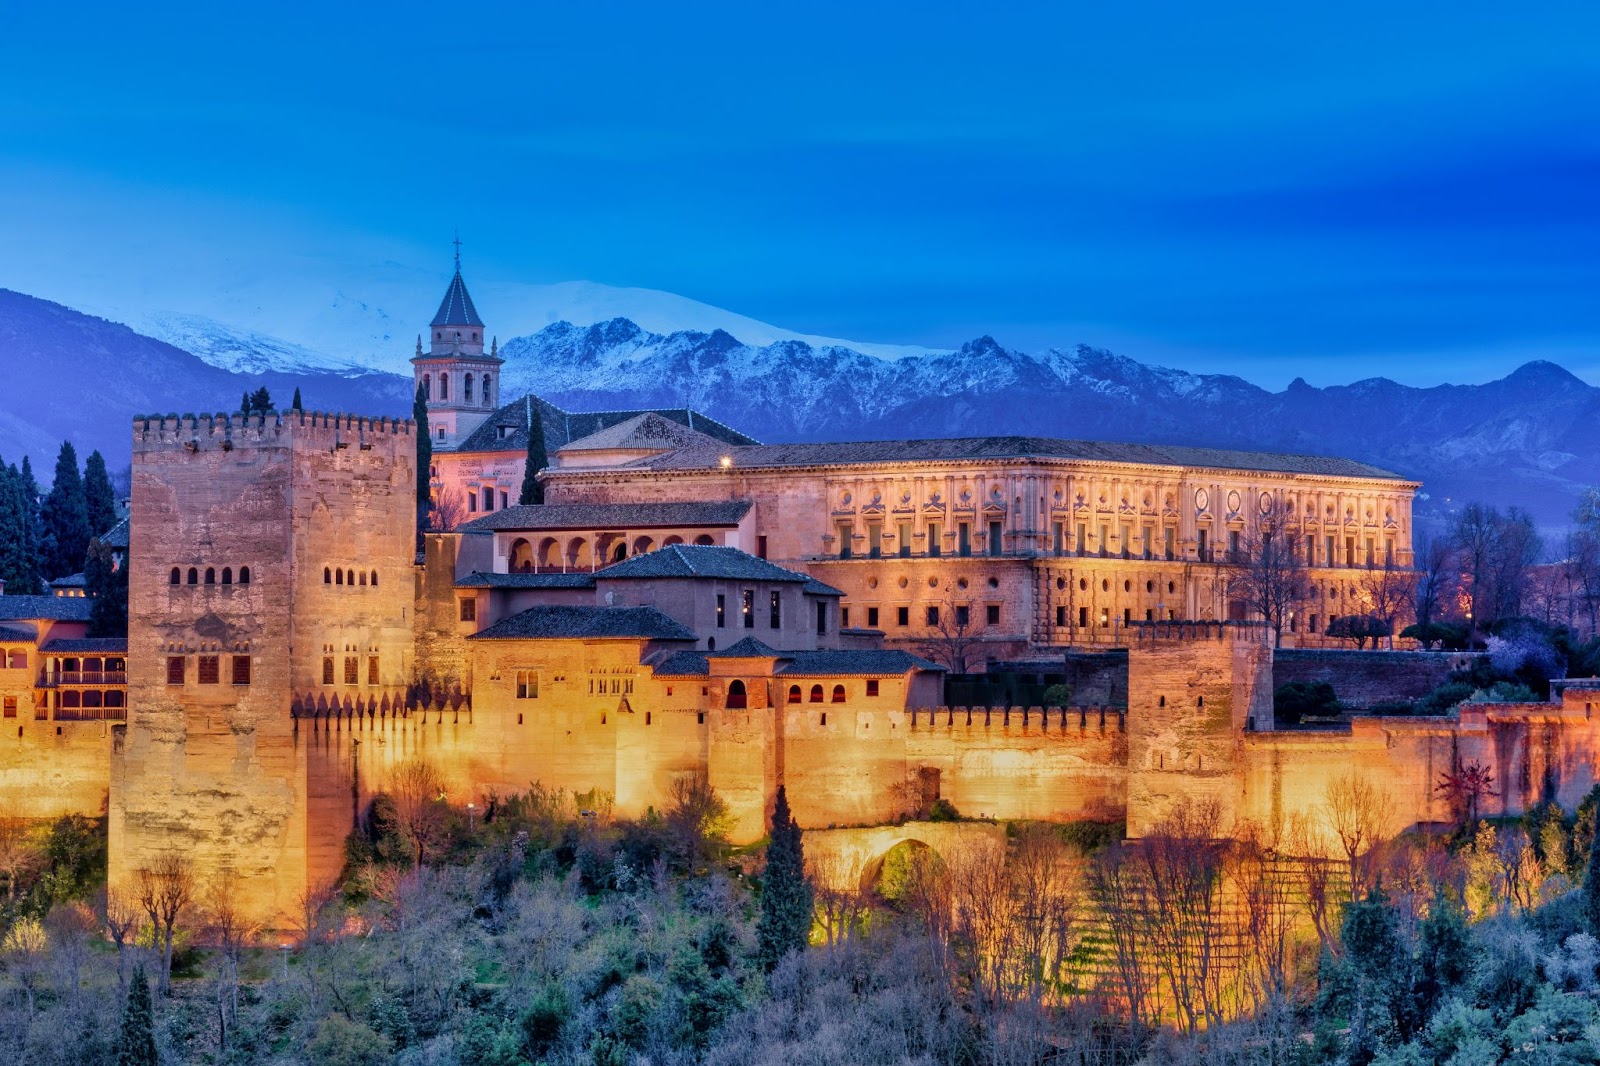 The Alhambra, Spain - 23 Top Sights to See Before You Die